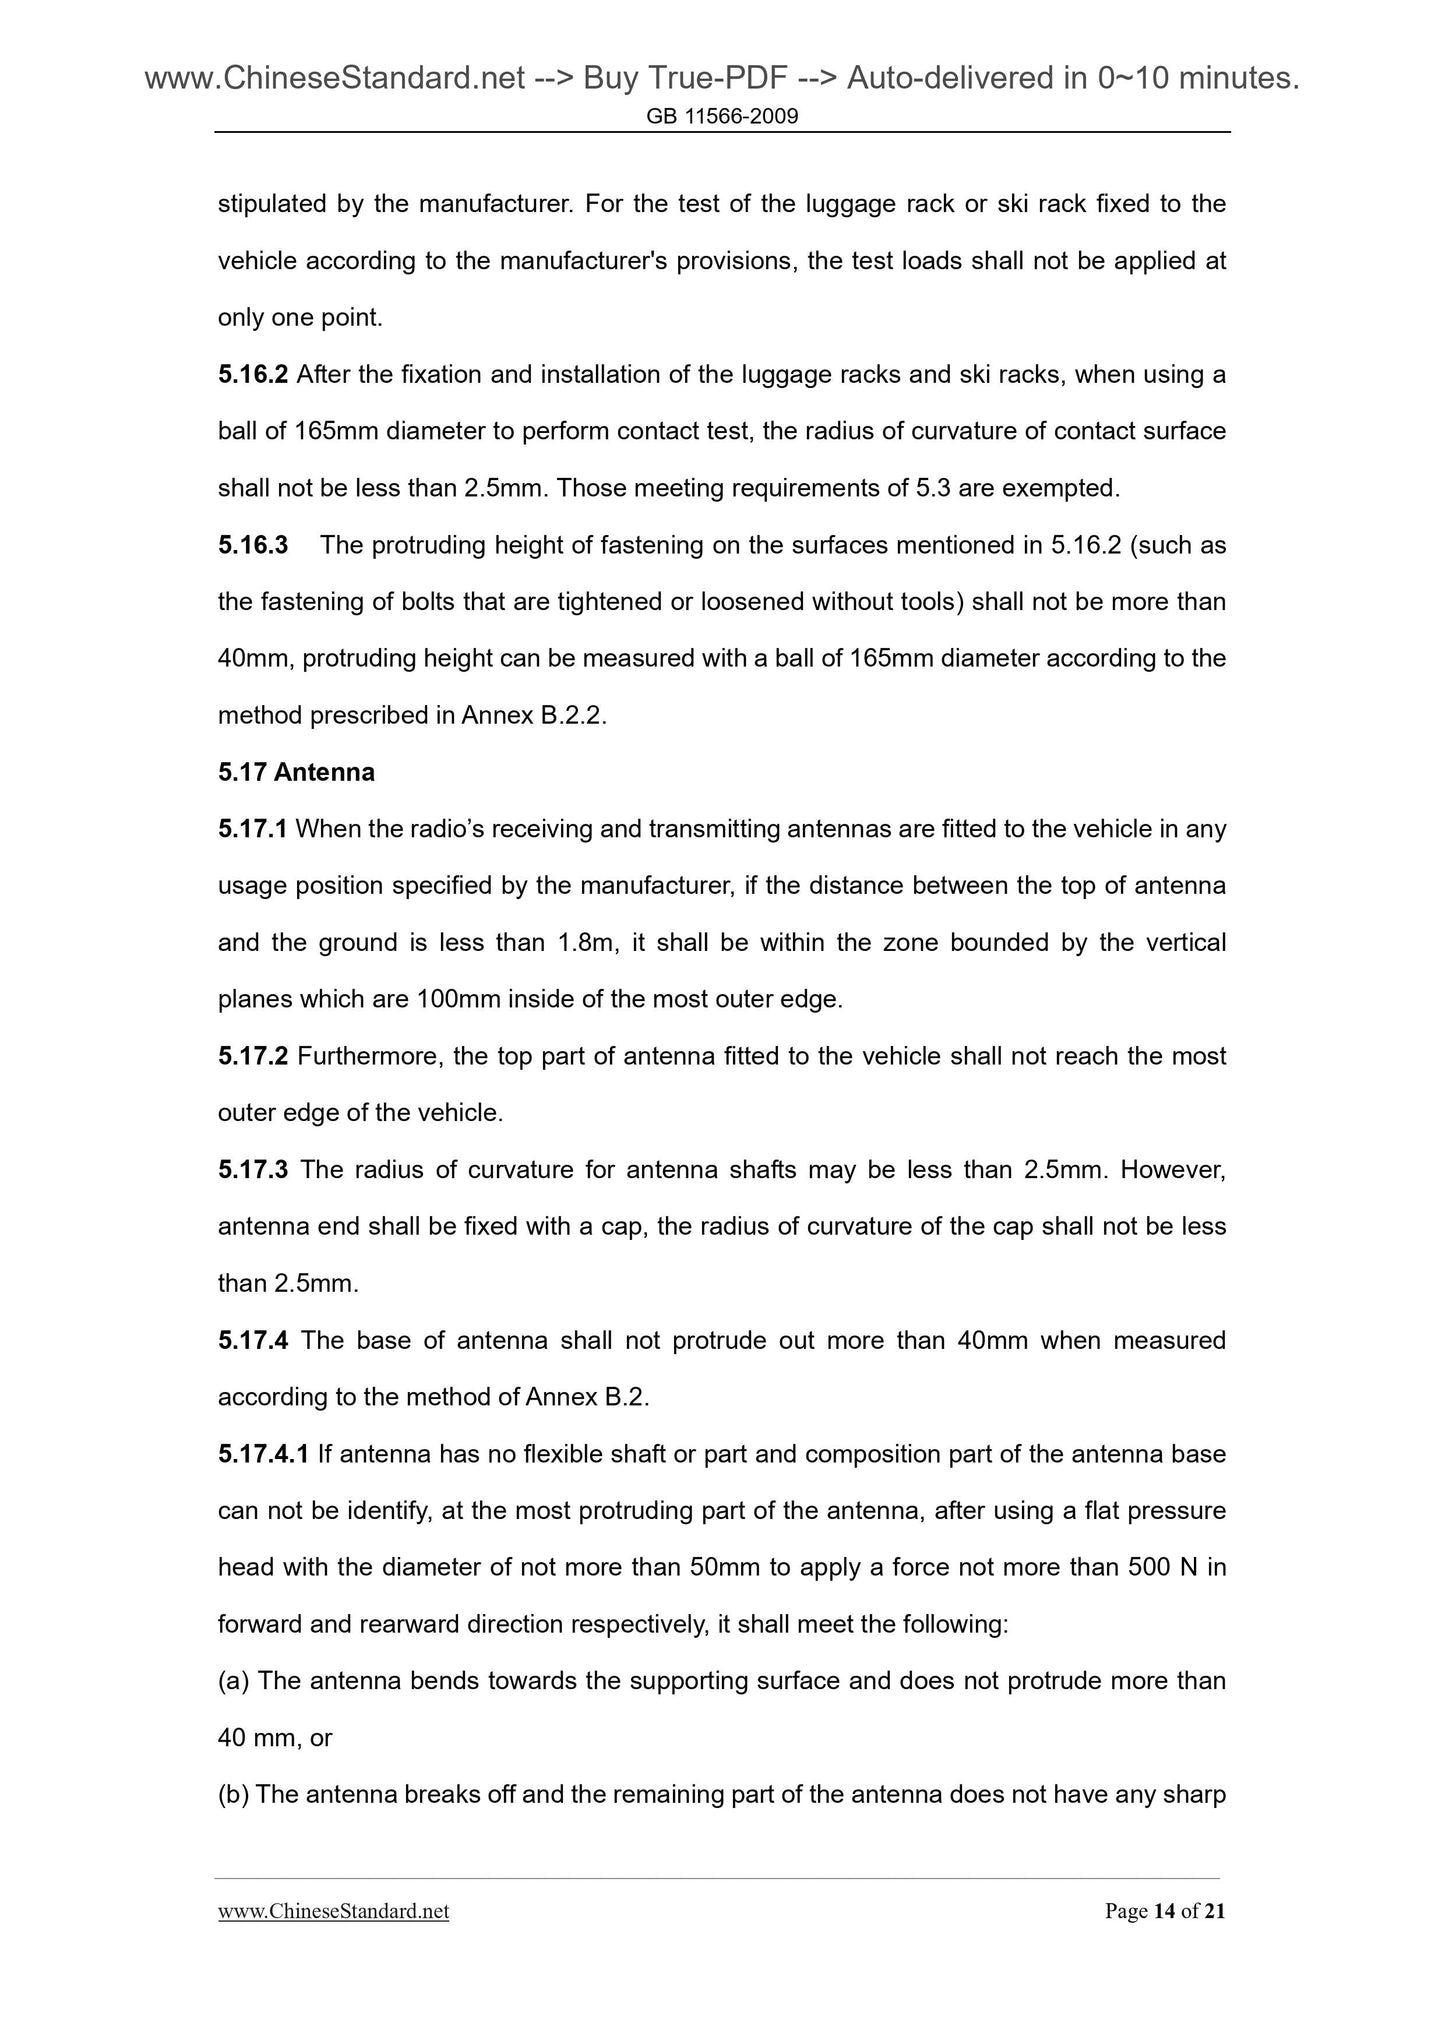 GB 11566-2009 Page 8